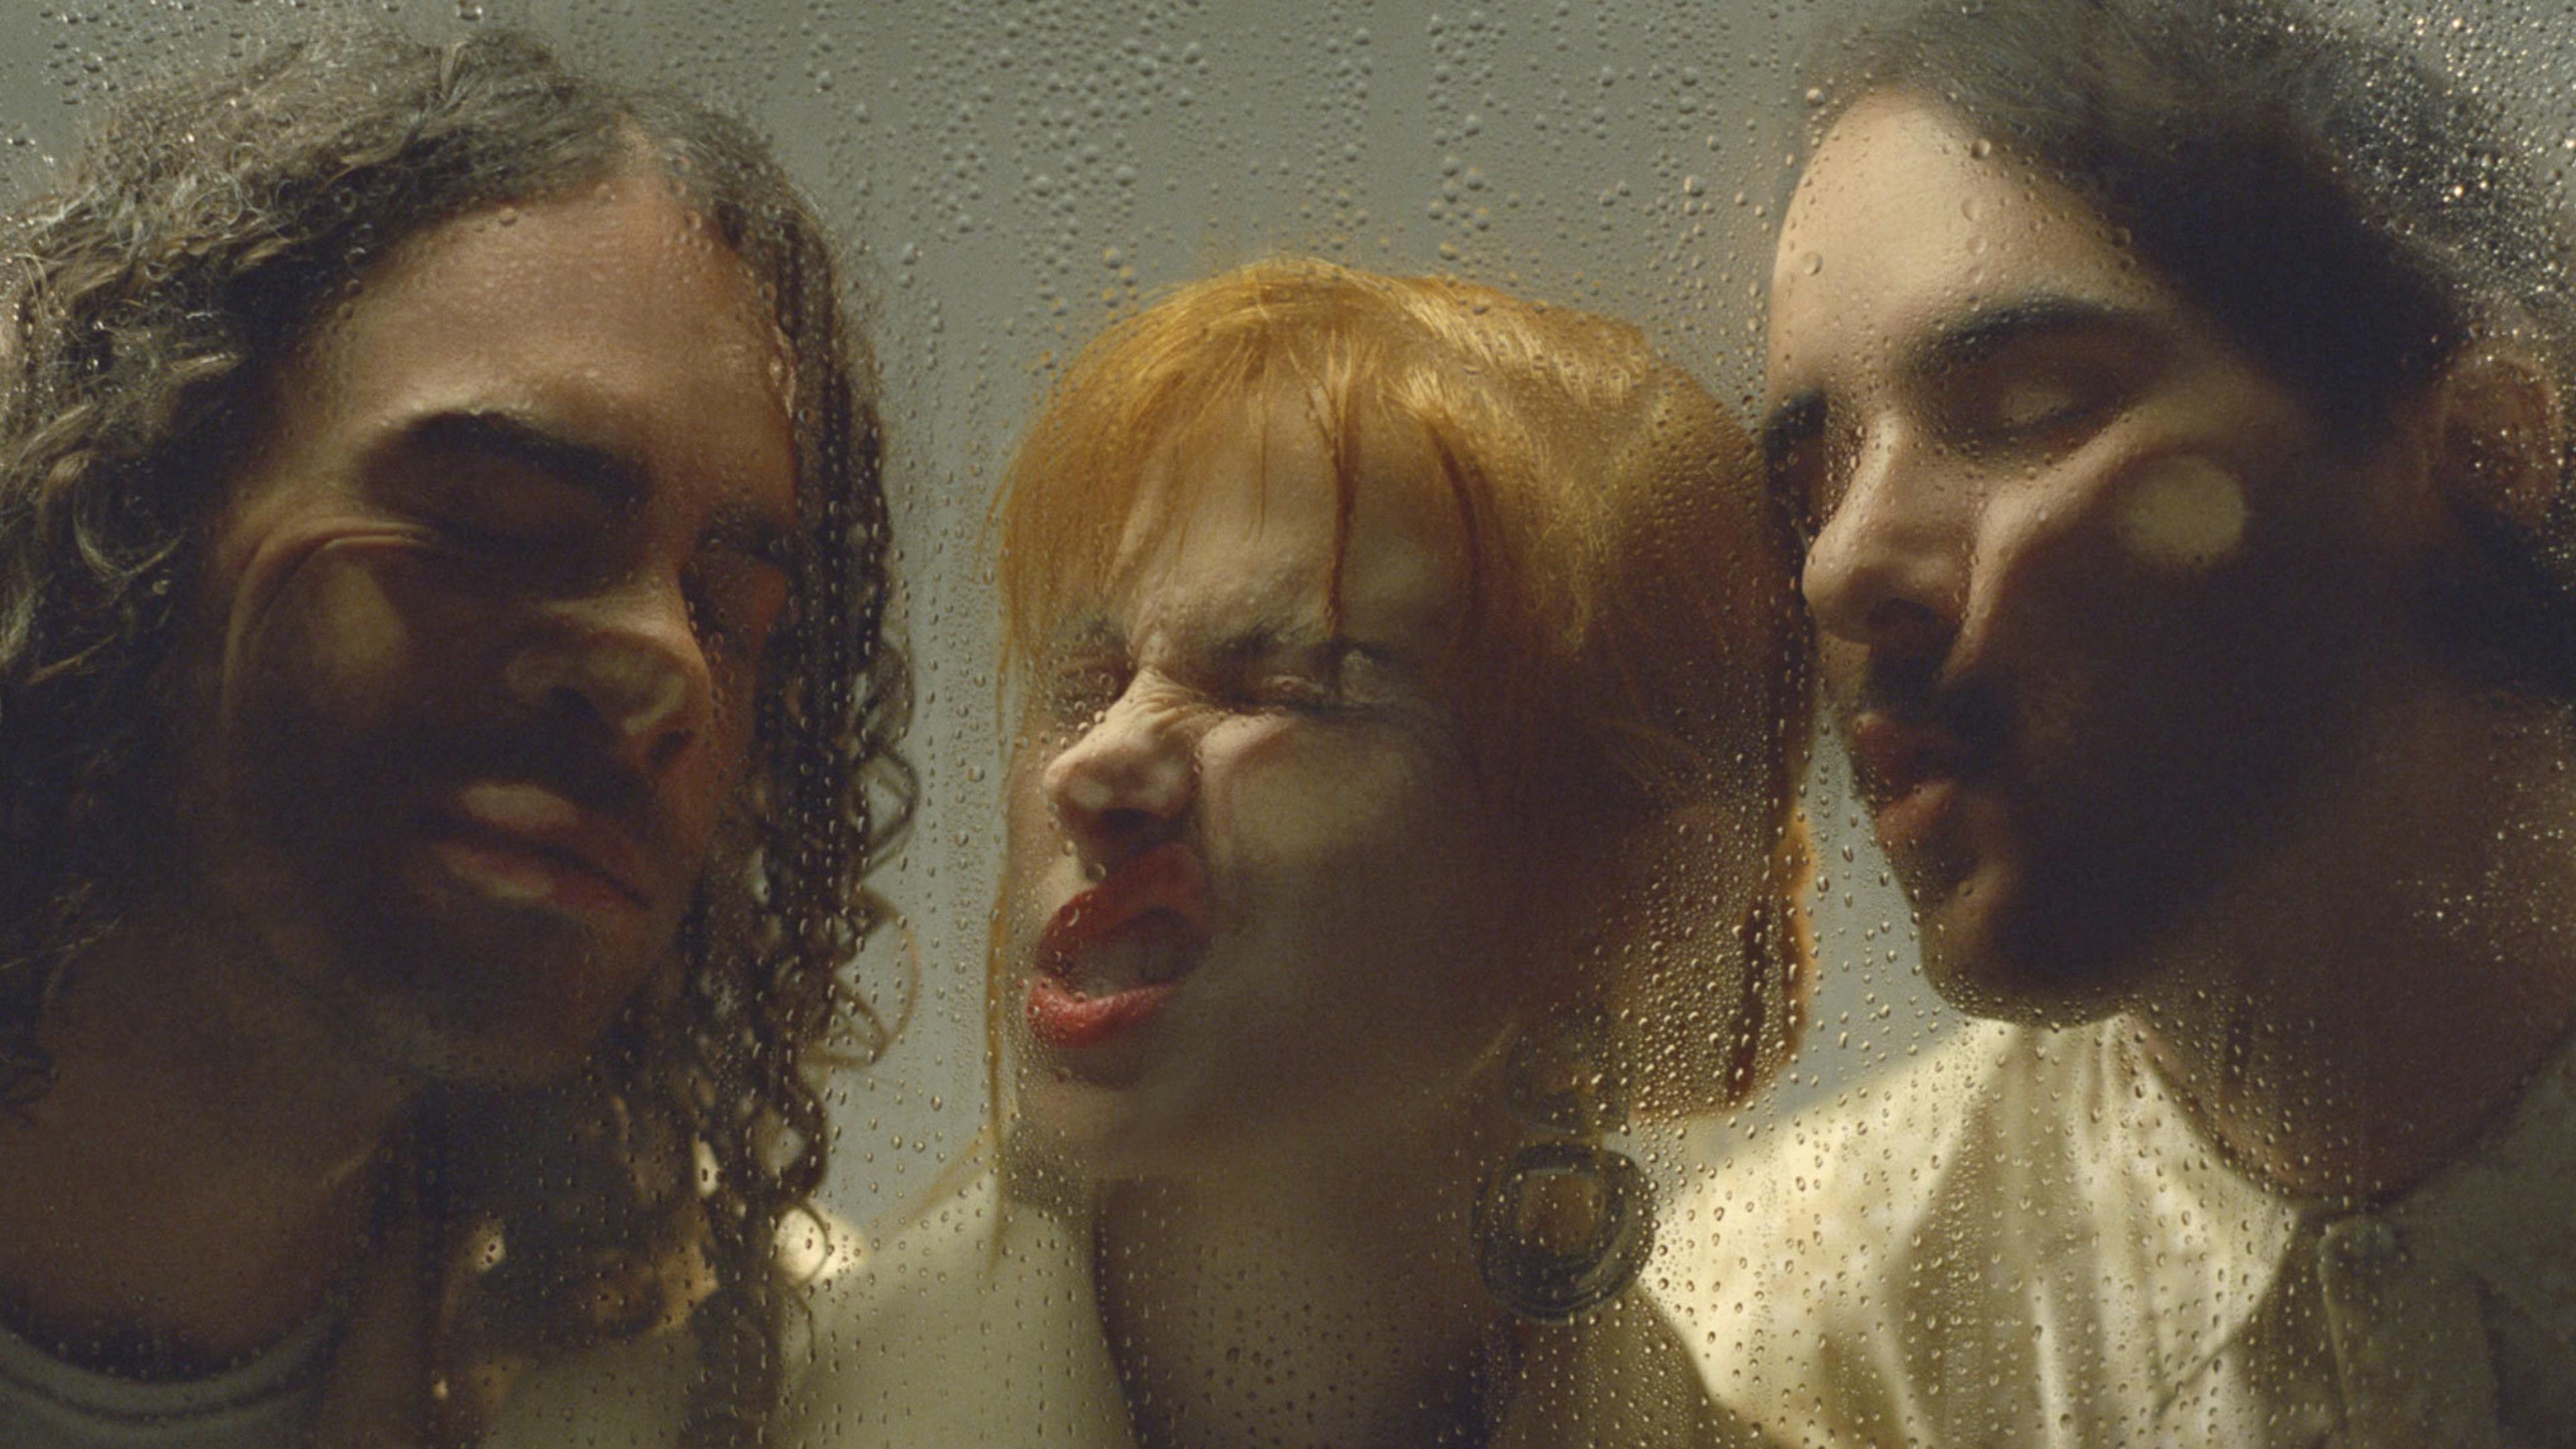 Listen now: New Paramore song 'This Is Why' has arrived